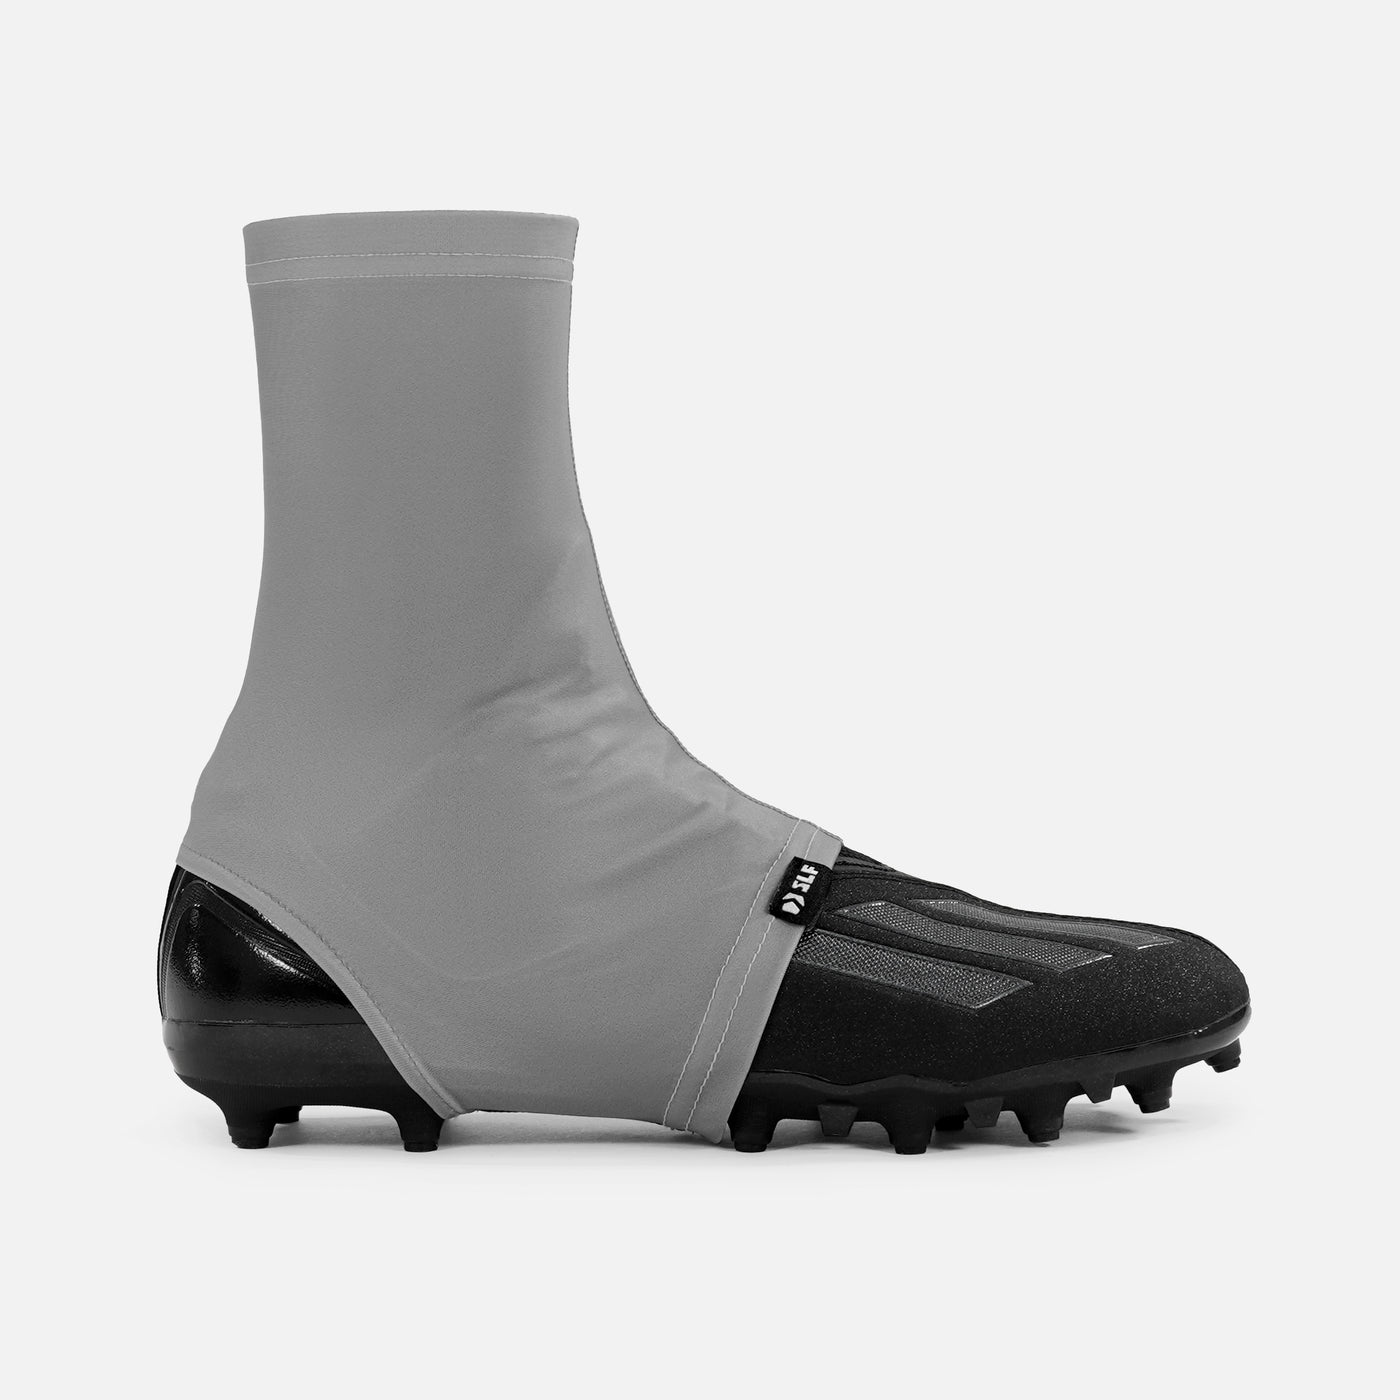 Hue Gray Spats / Cleat Covers